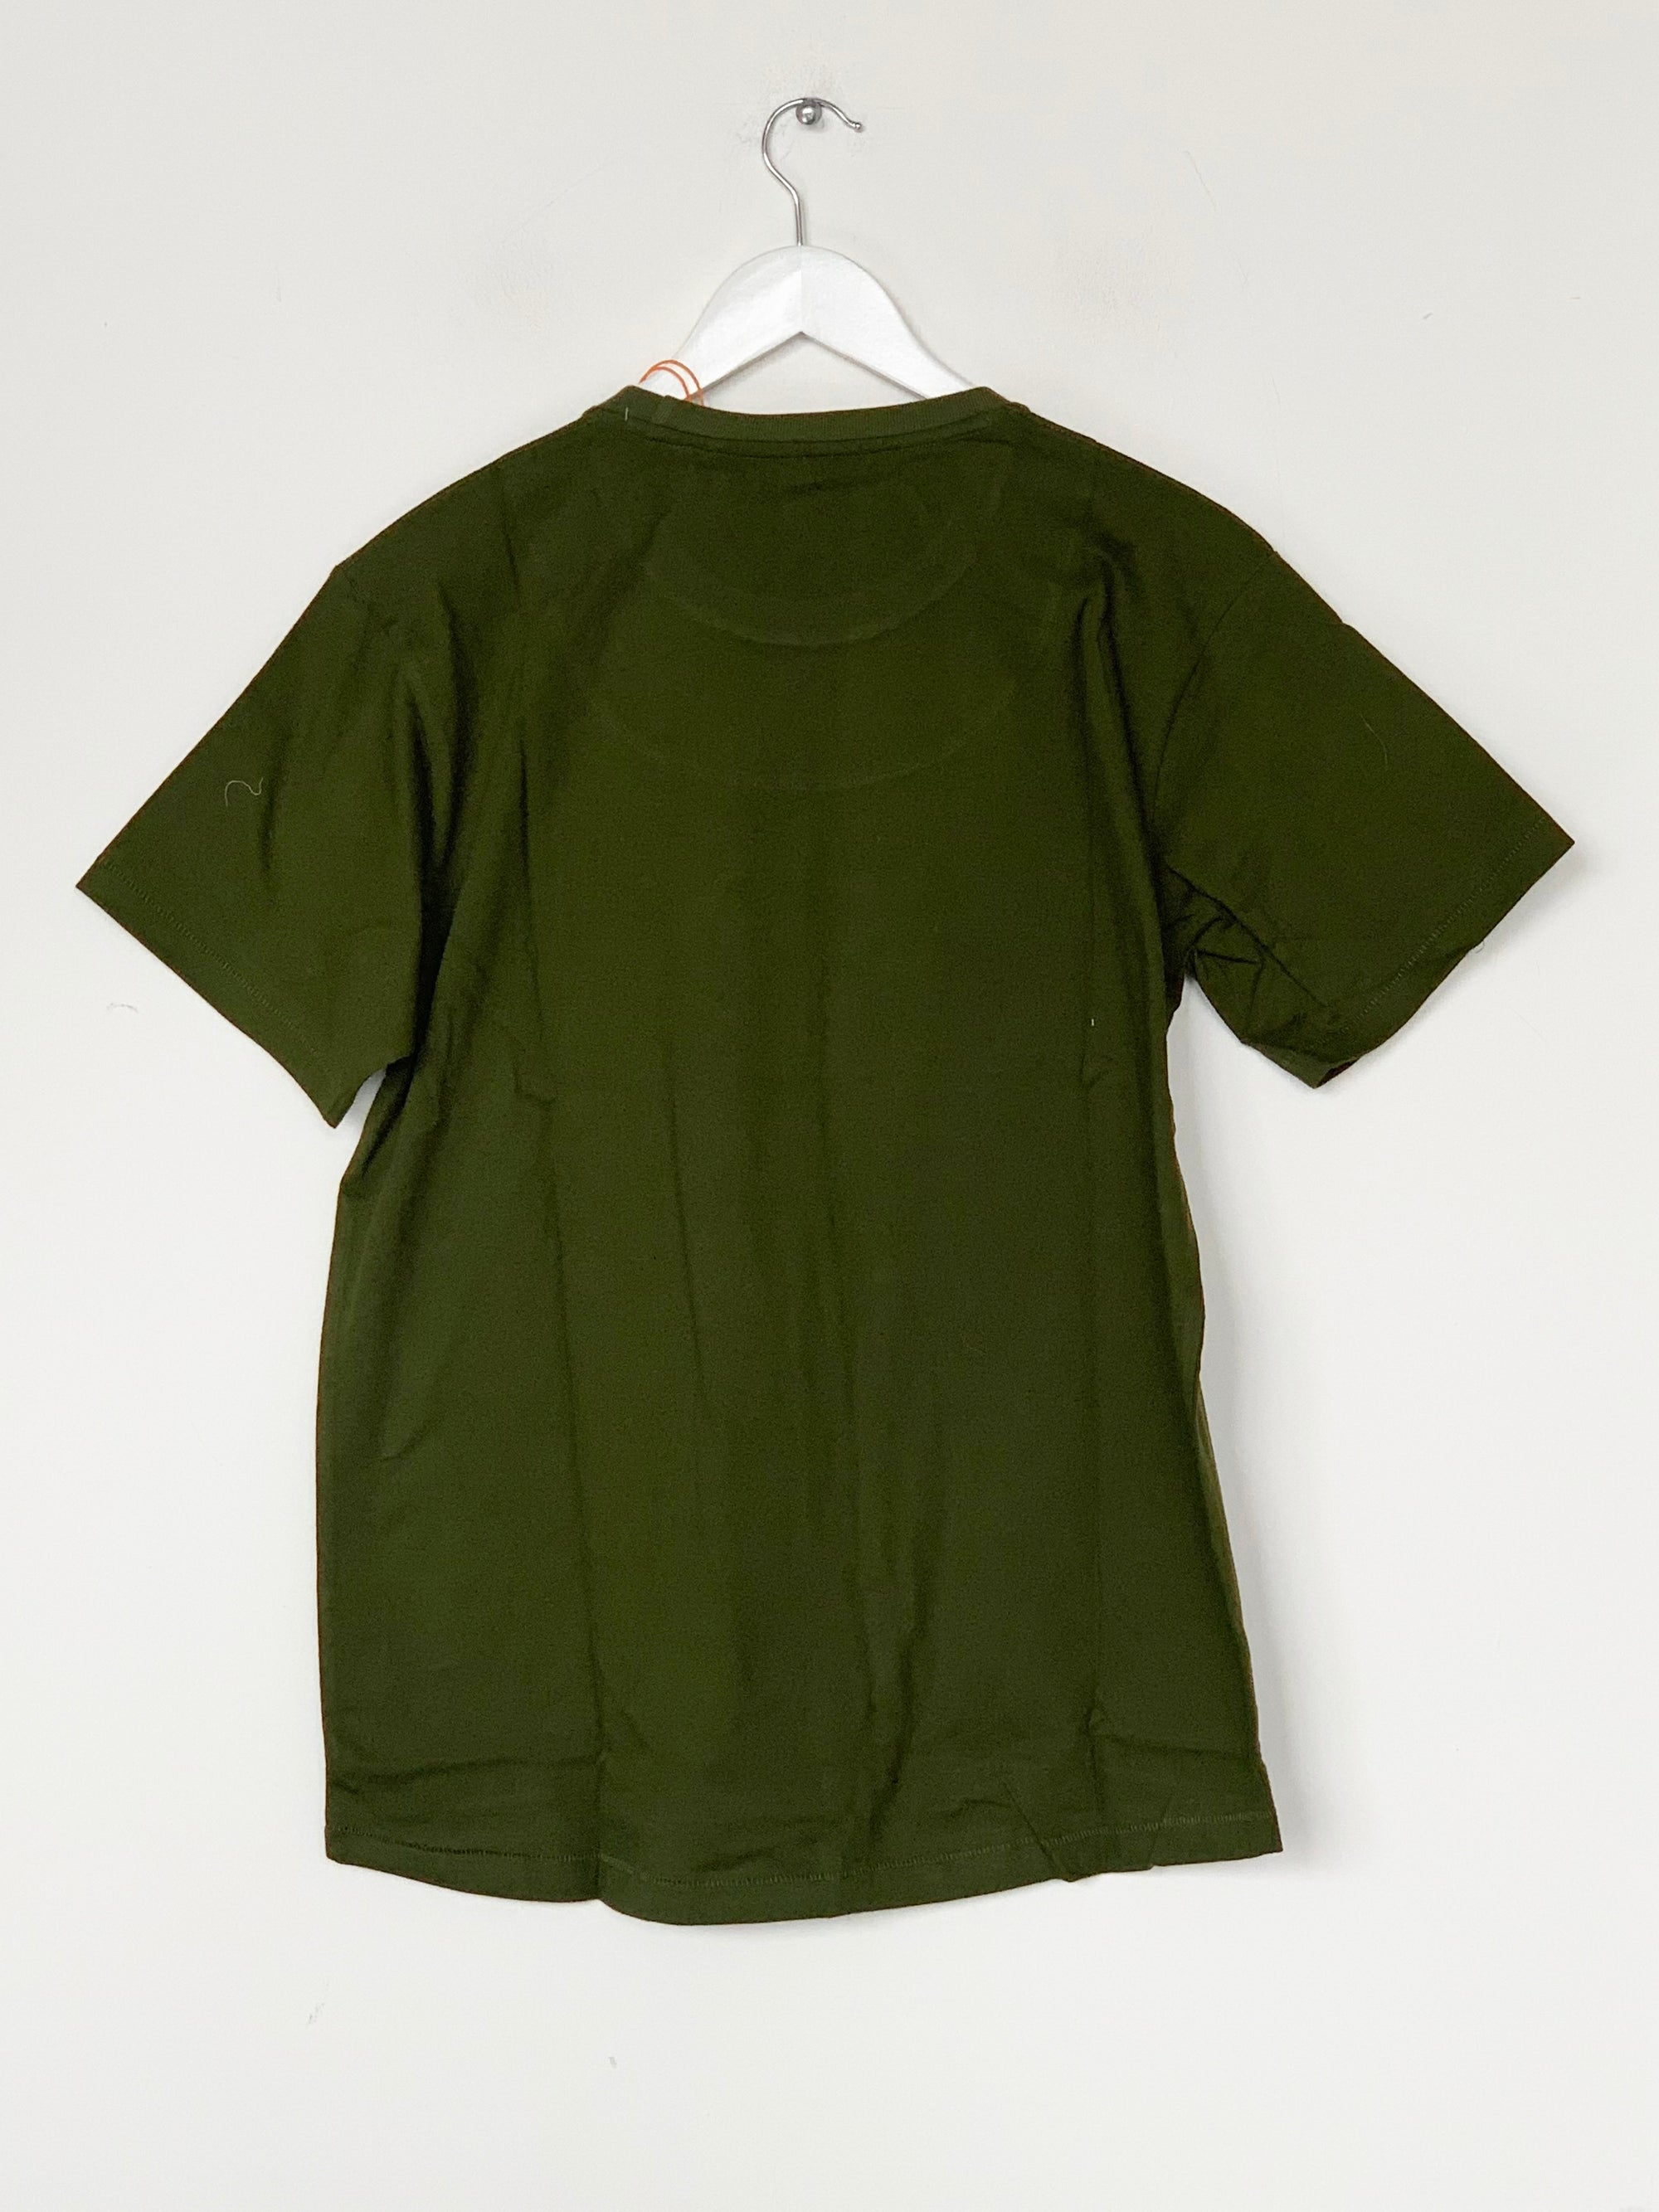 Heavy Tee in Olive